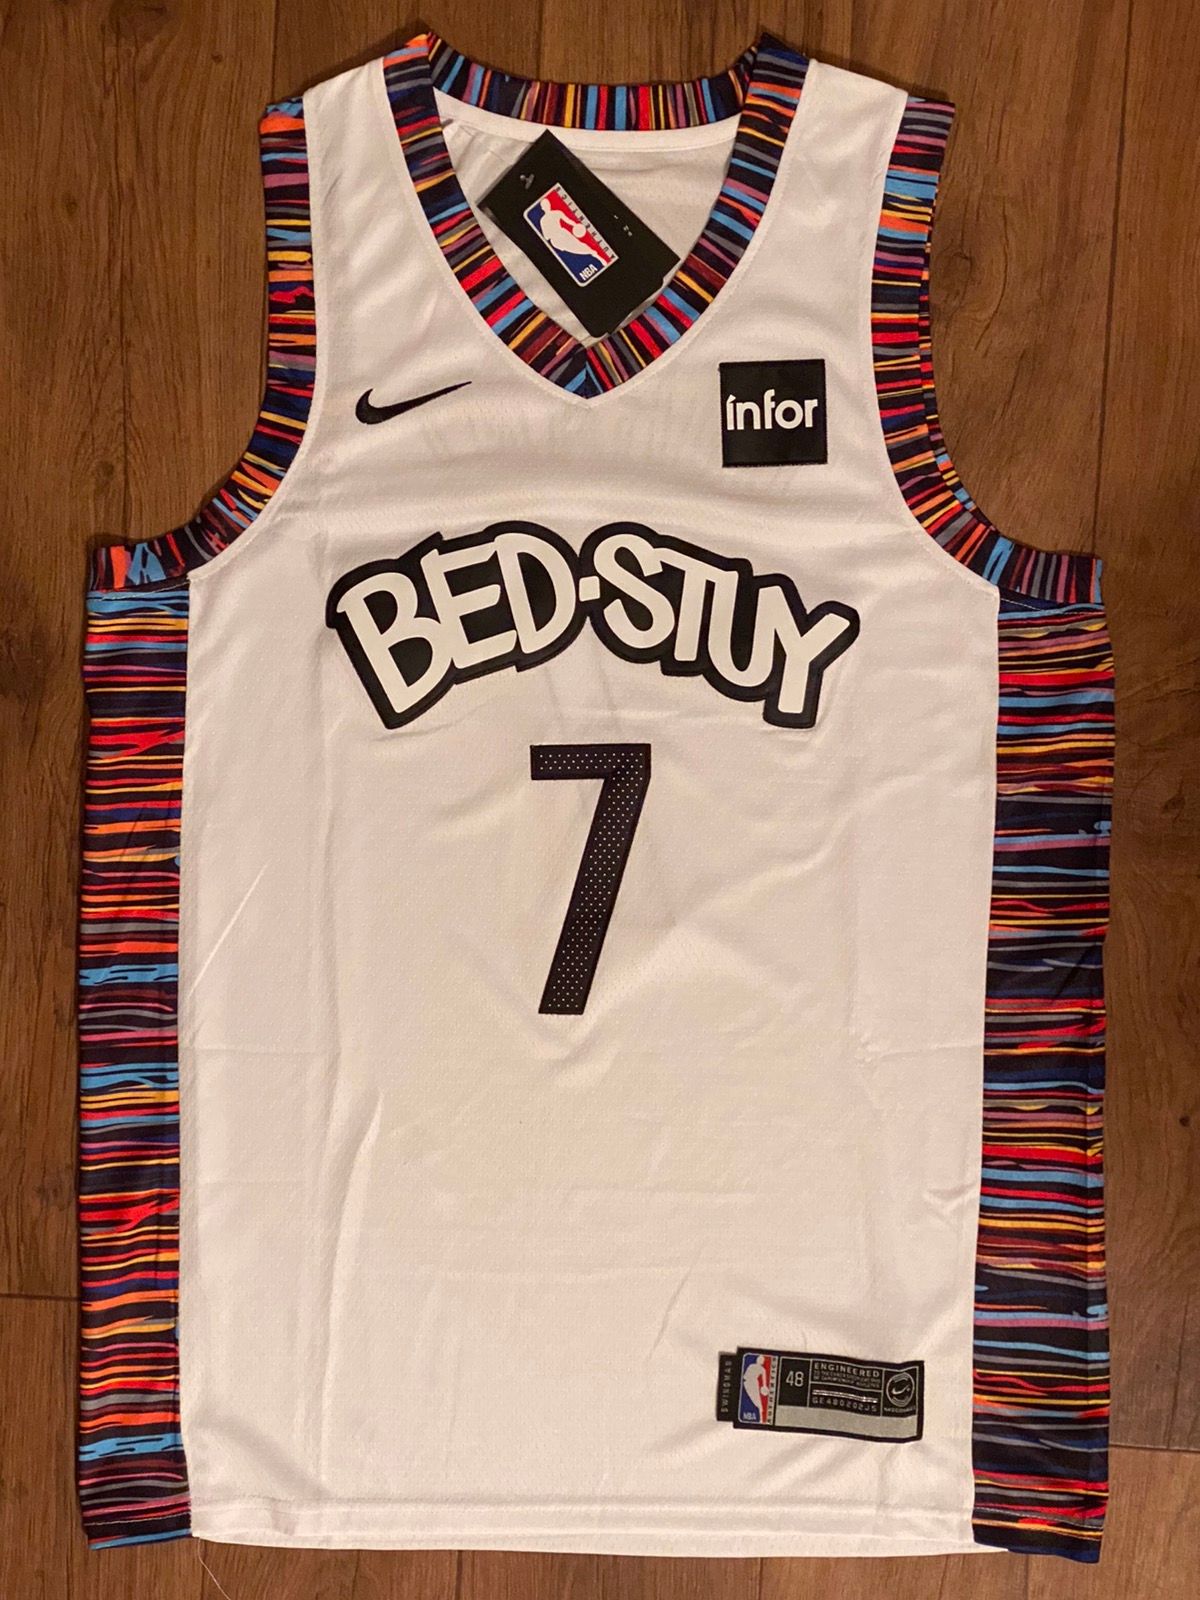 Nike Kevin Durant Bed-Stuy Brooklyn Nets Jersey Size US M / EU 48-50 / 2 - 1 Preview